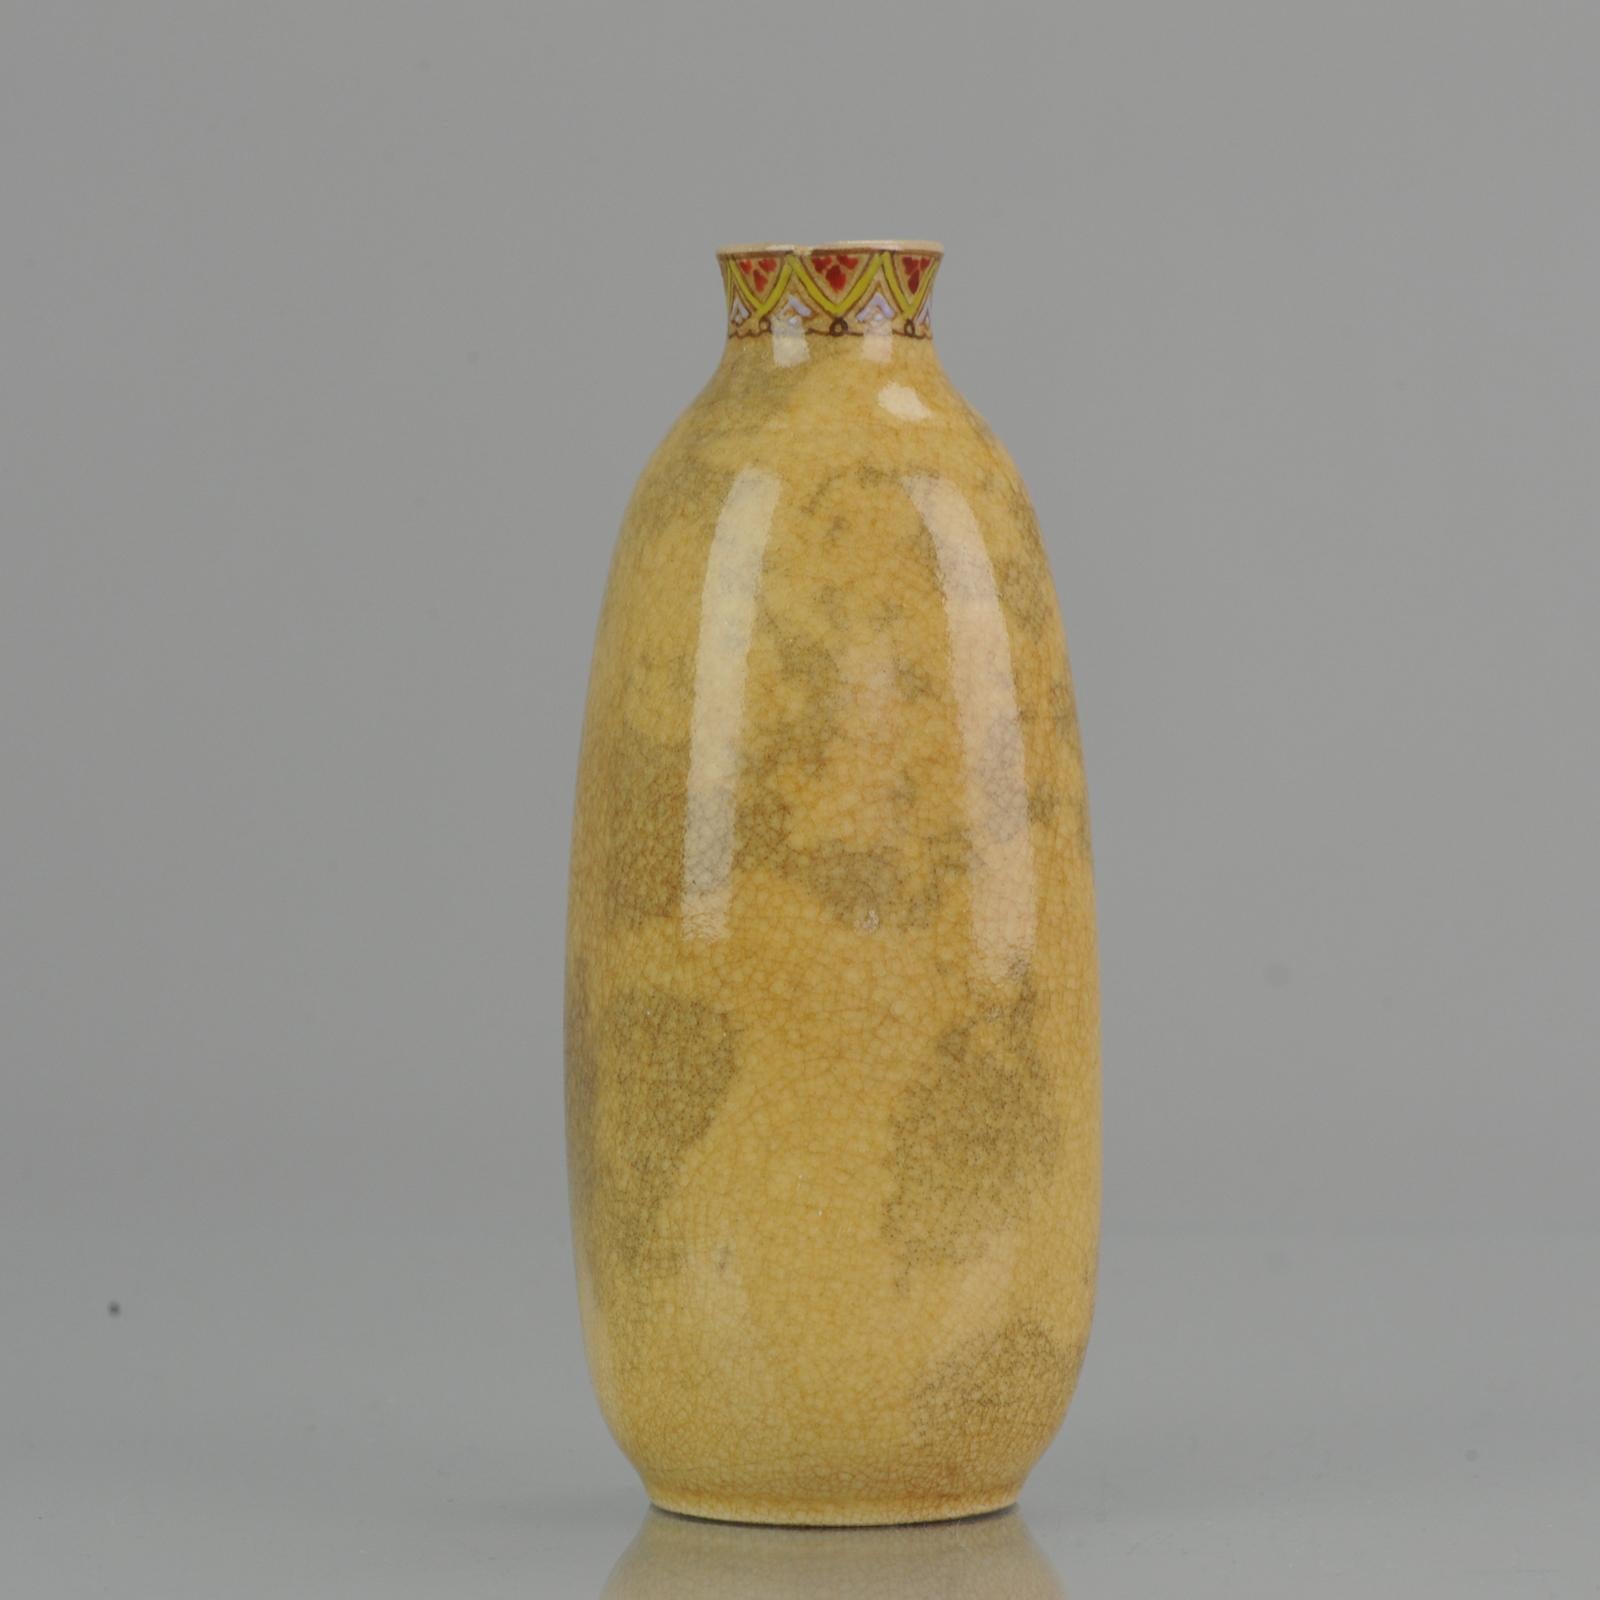 A nice Sake Bottle or Tokkuri. Satsuma from Kyoto.

Additional information:
Material: Porcelain & Pottery
Type: Vases
Region of Origin: Japan
Period: Meiji Periode (1867-1912)
Age: 19th century
Original/Reproduction: Original
Condition: Overall